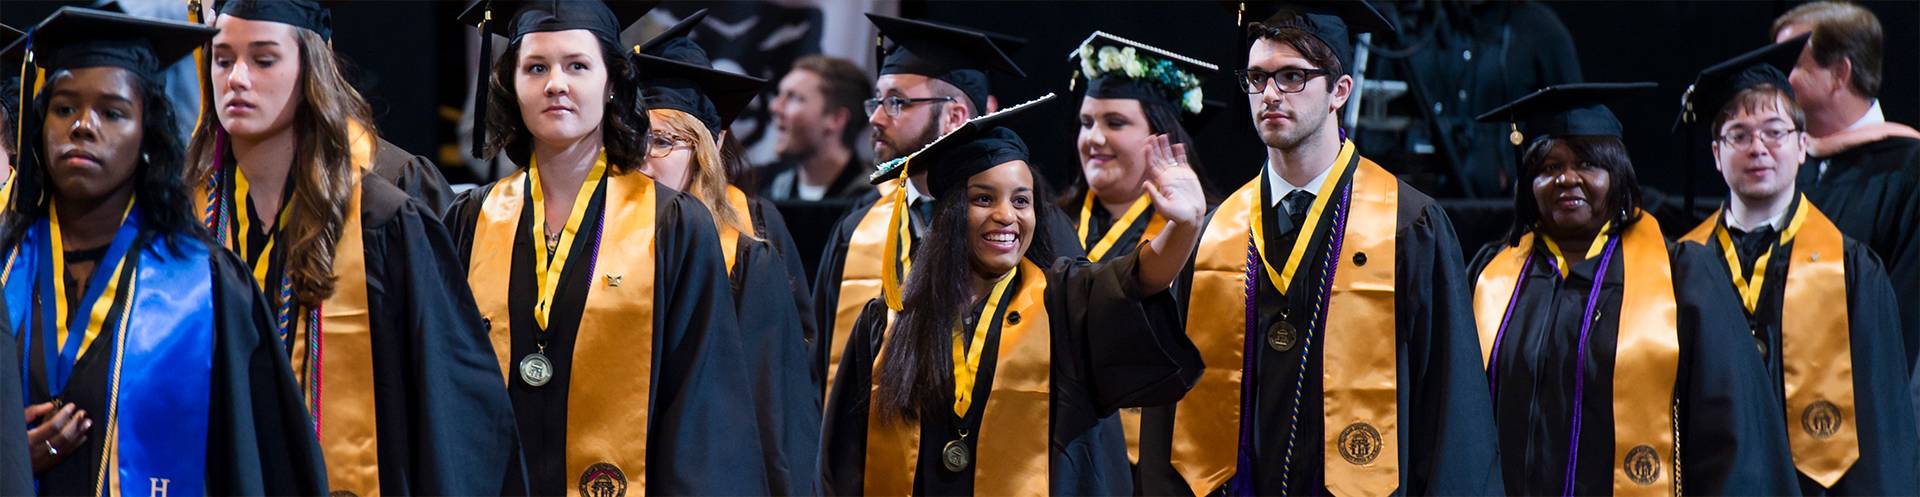 ksu students in cap and gown at commencement